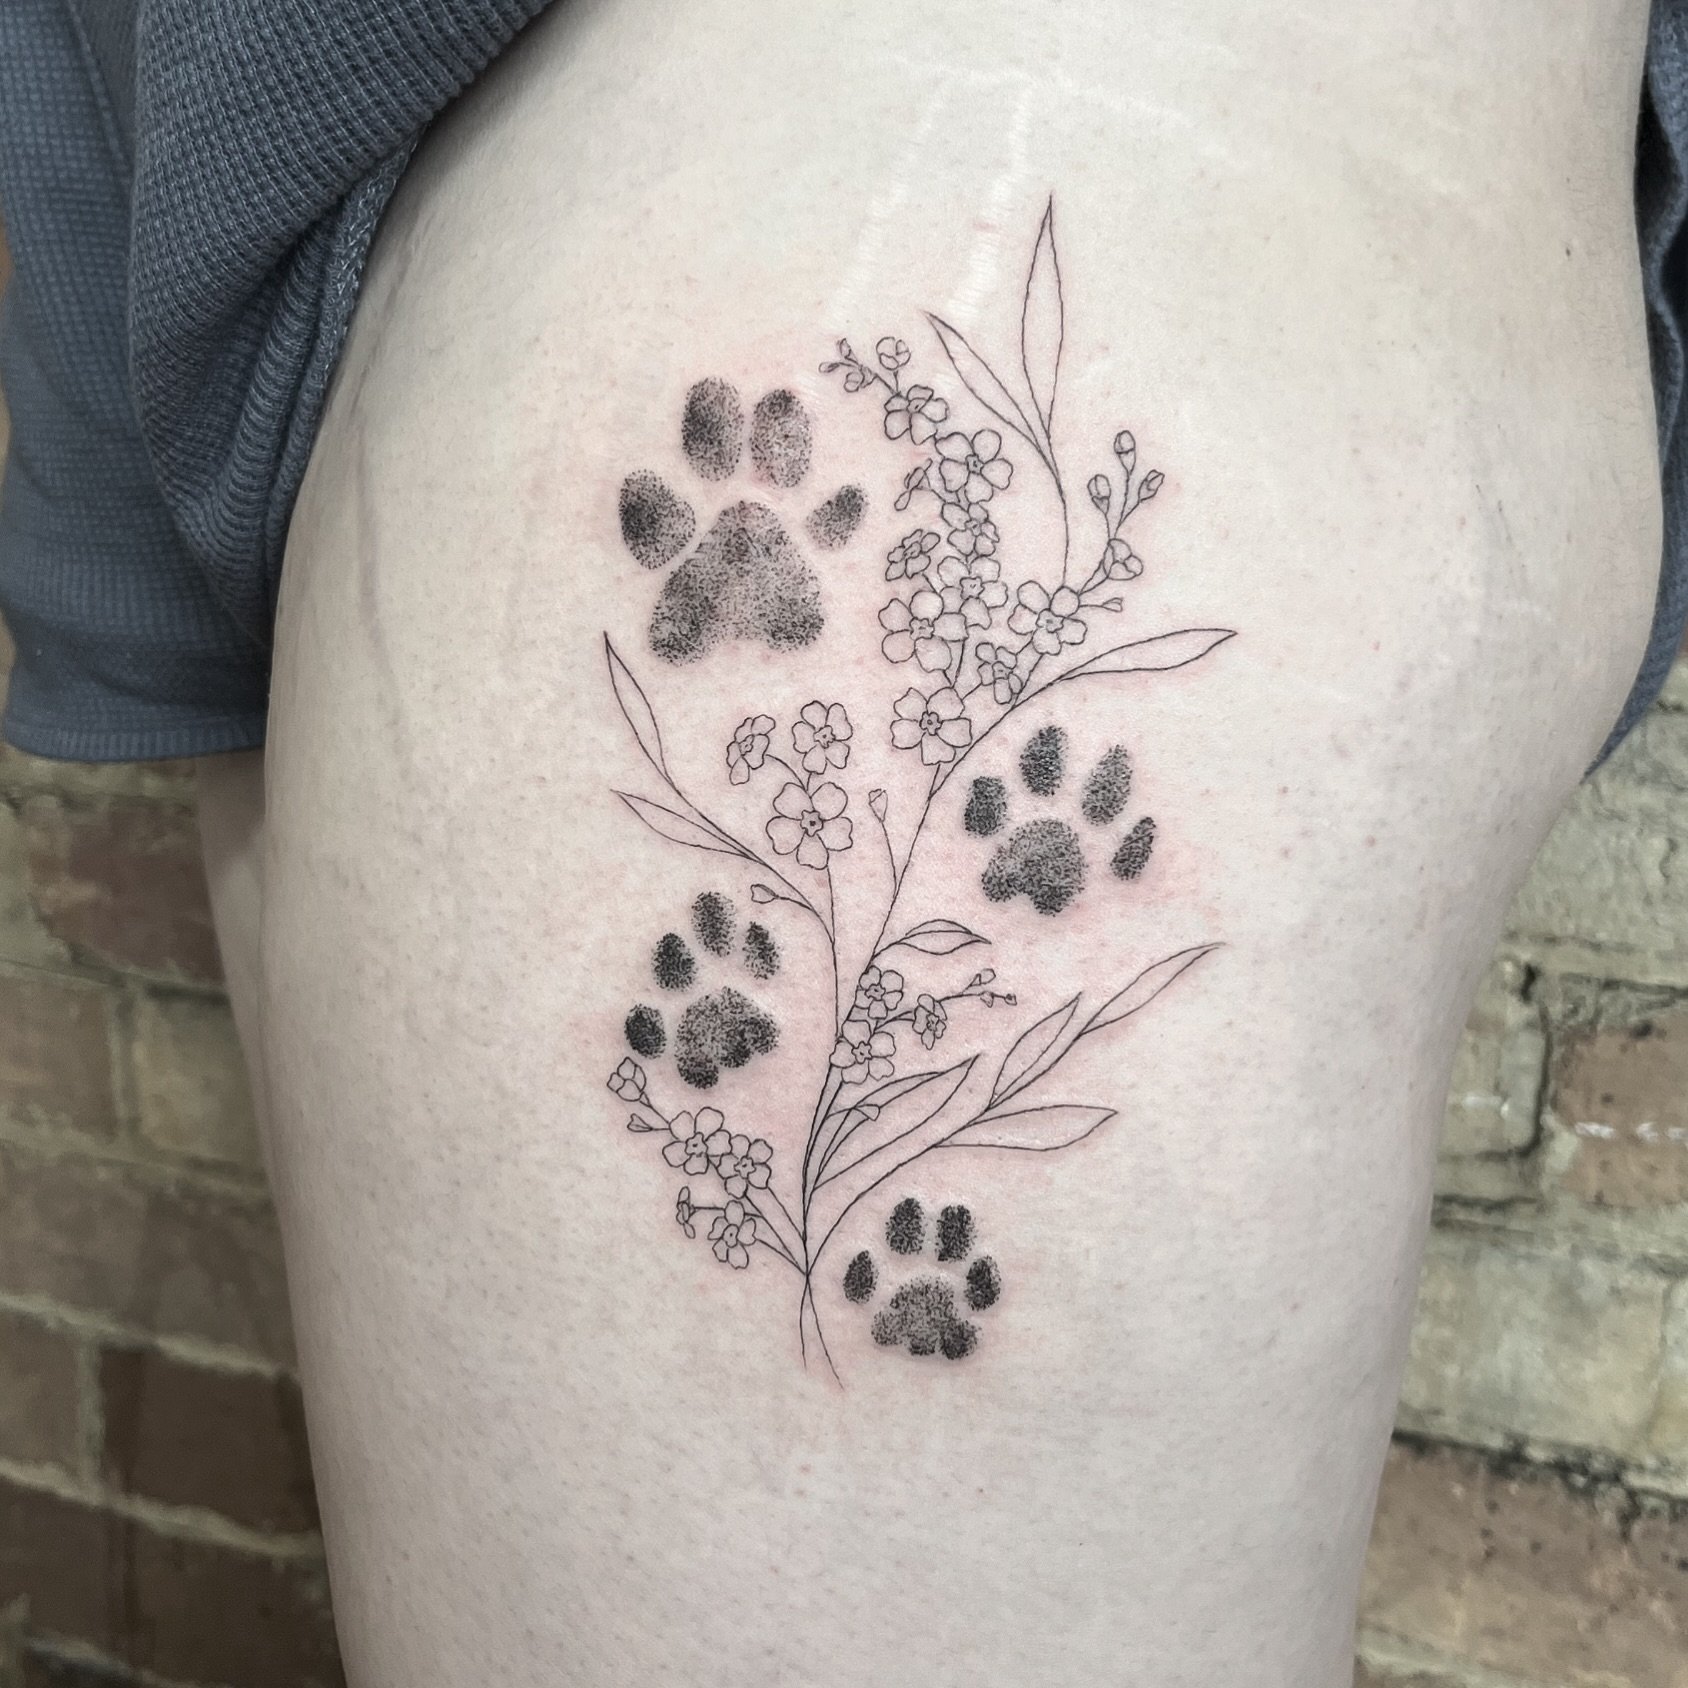 Thanks for trusting me with your precious paws Bea 🥰
&bull;
&bull;
&bull;
&bull;
&bull;
&bull;
#pawtattoo #pettattoo #floraltattoos #finelinetattoos #jochastney #bournemouthtattoo